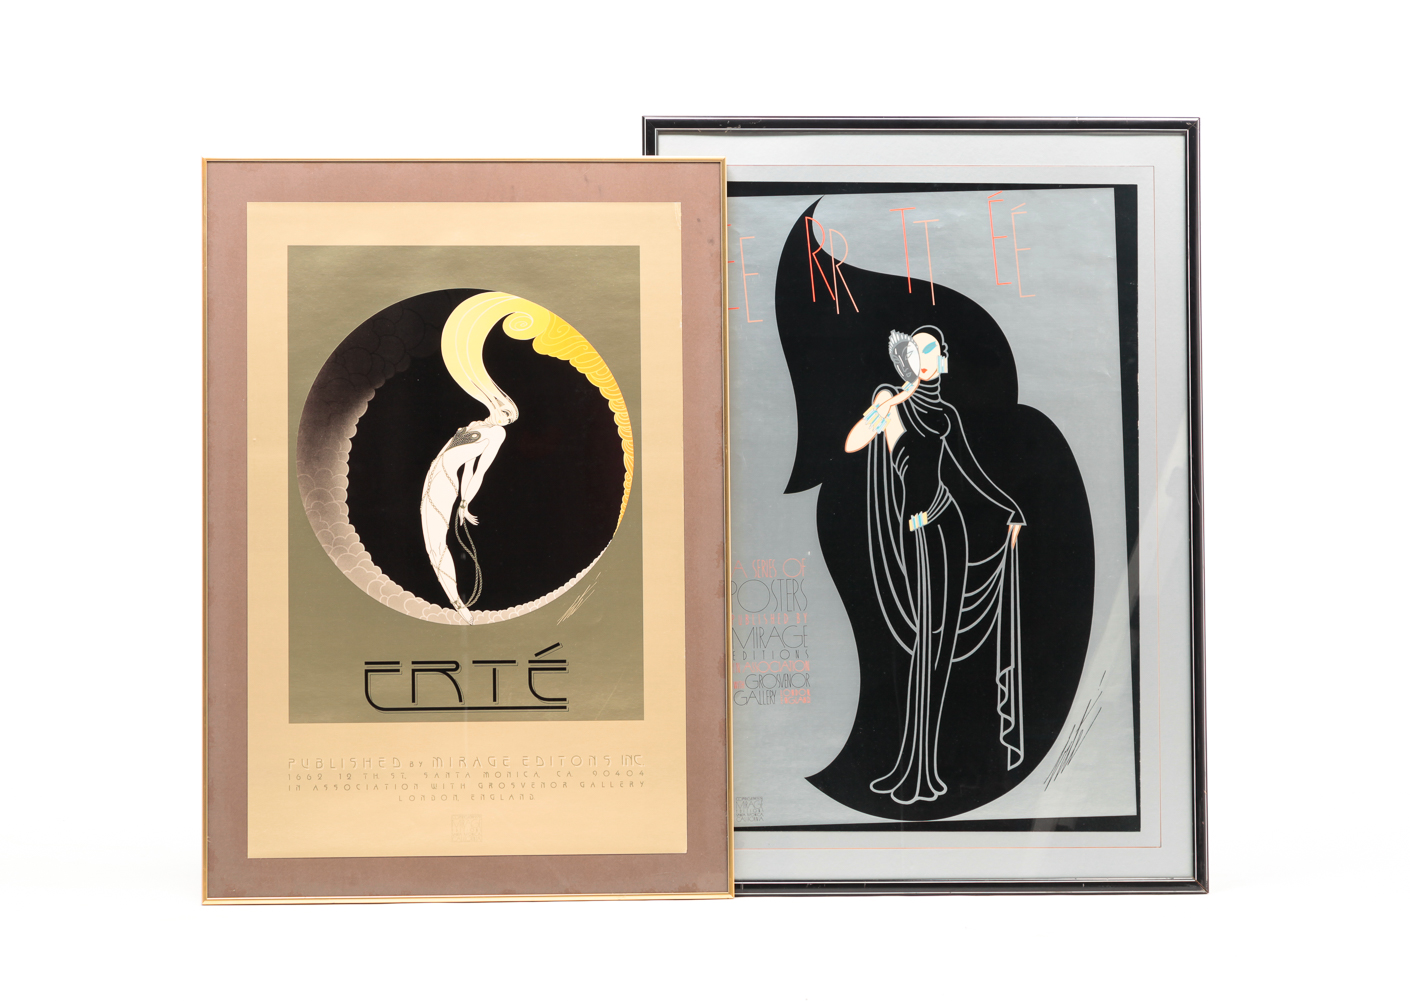 TWO ERTE POSTERS BY MIRAGE EDITIONS  2dfeb7